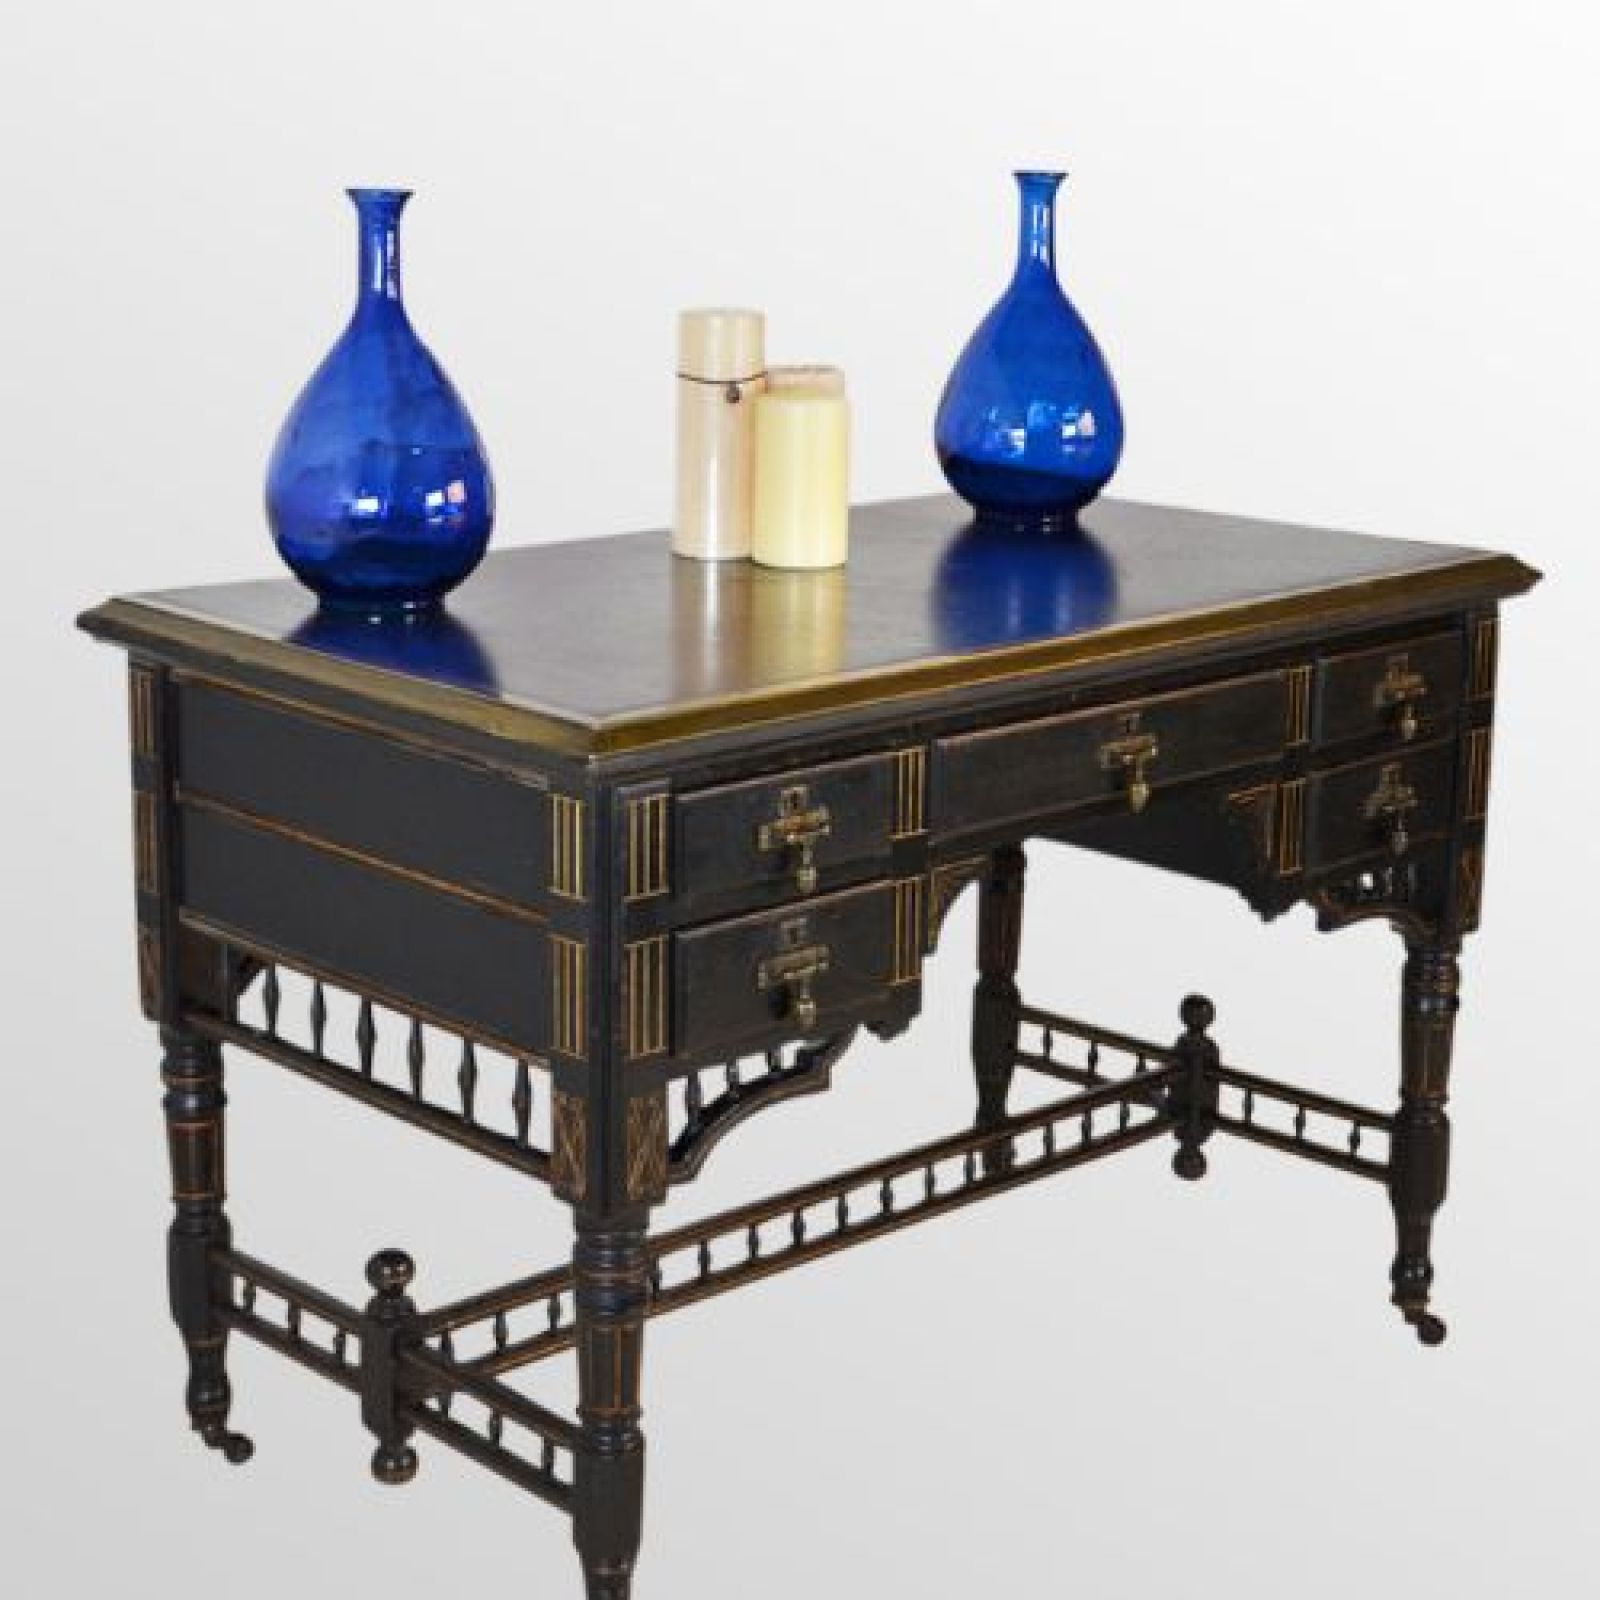 Double Sided Writing Desk - Aesthetic Period